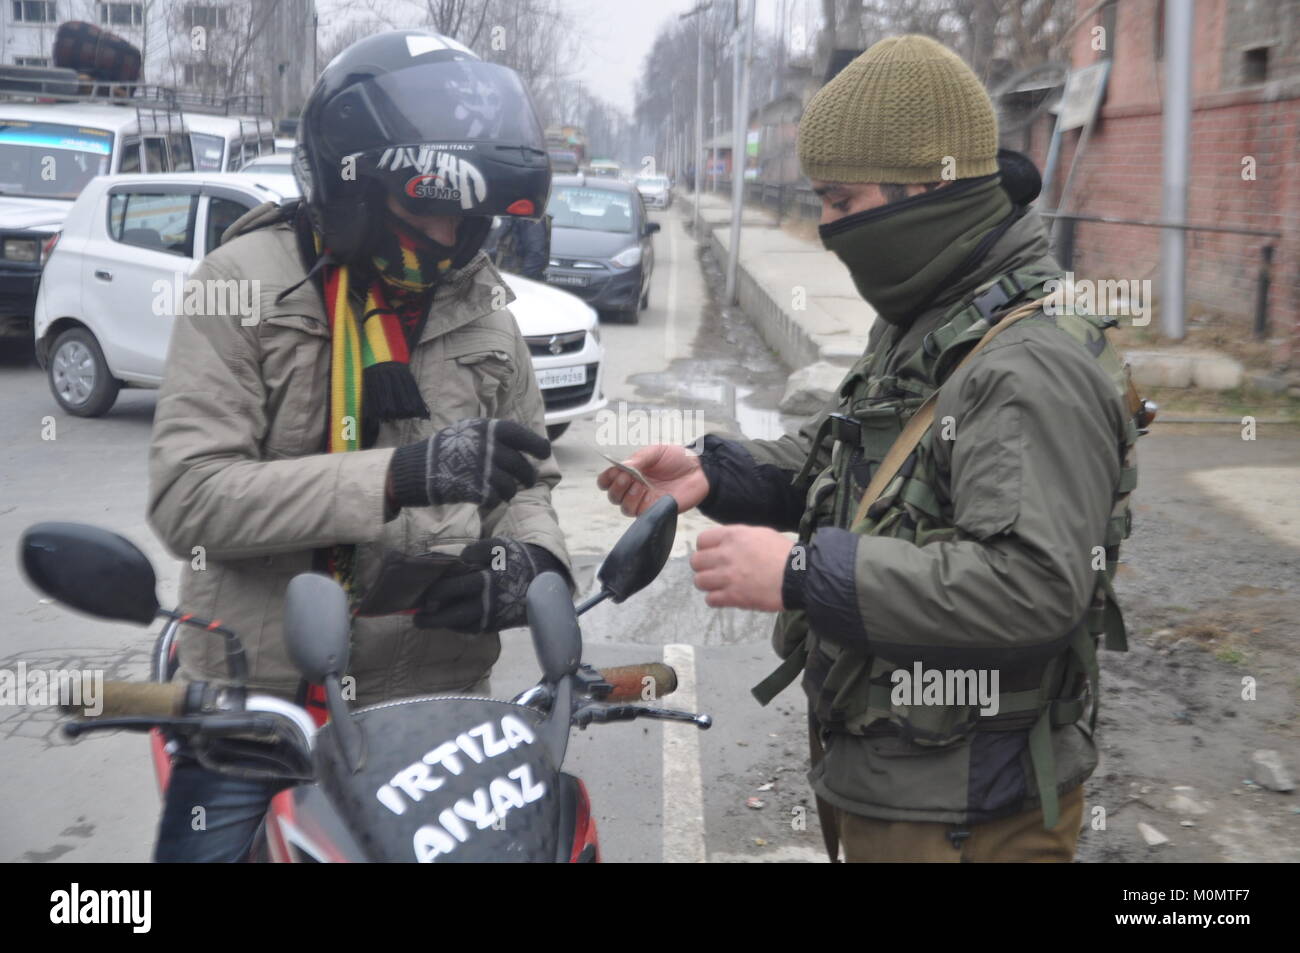 Police Man Checking The Identity Of A Man in Anantnag, Kashmir on January 23, 2018, ahead of Indian Republic Day on January 26. Stock Photo